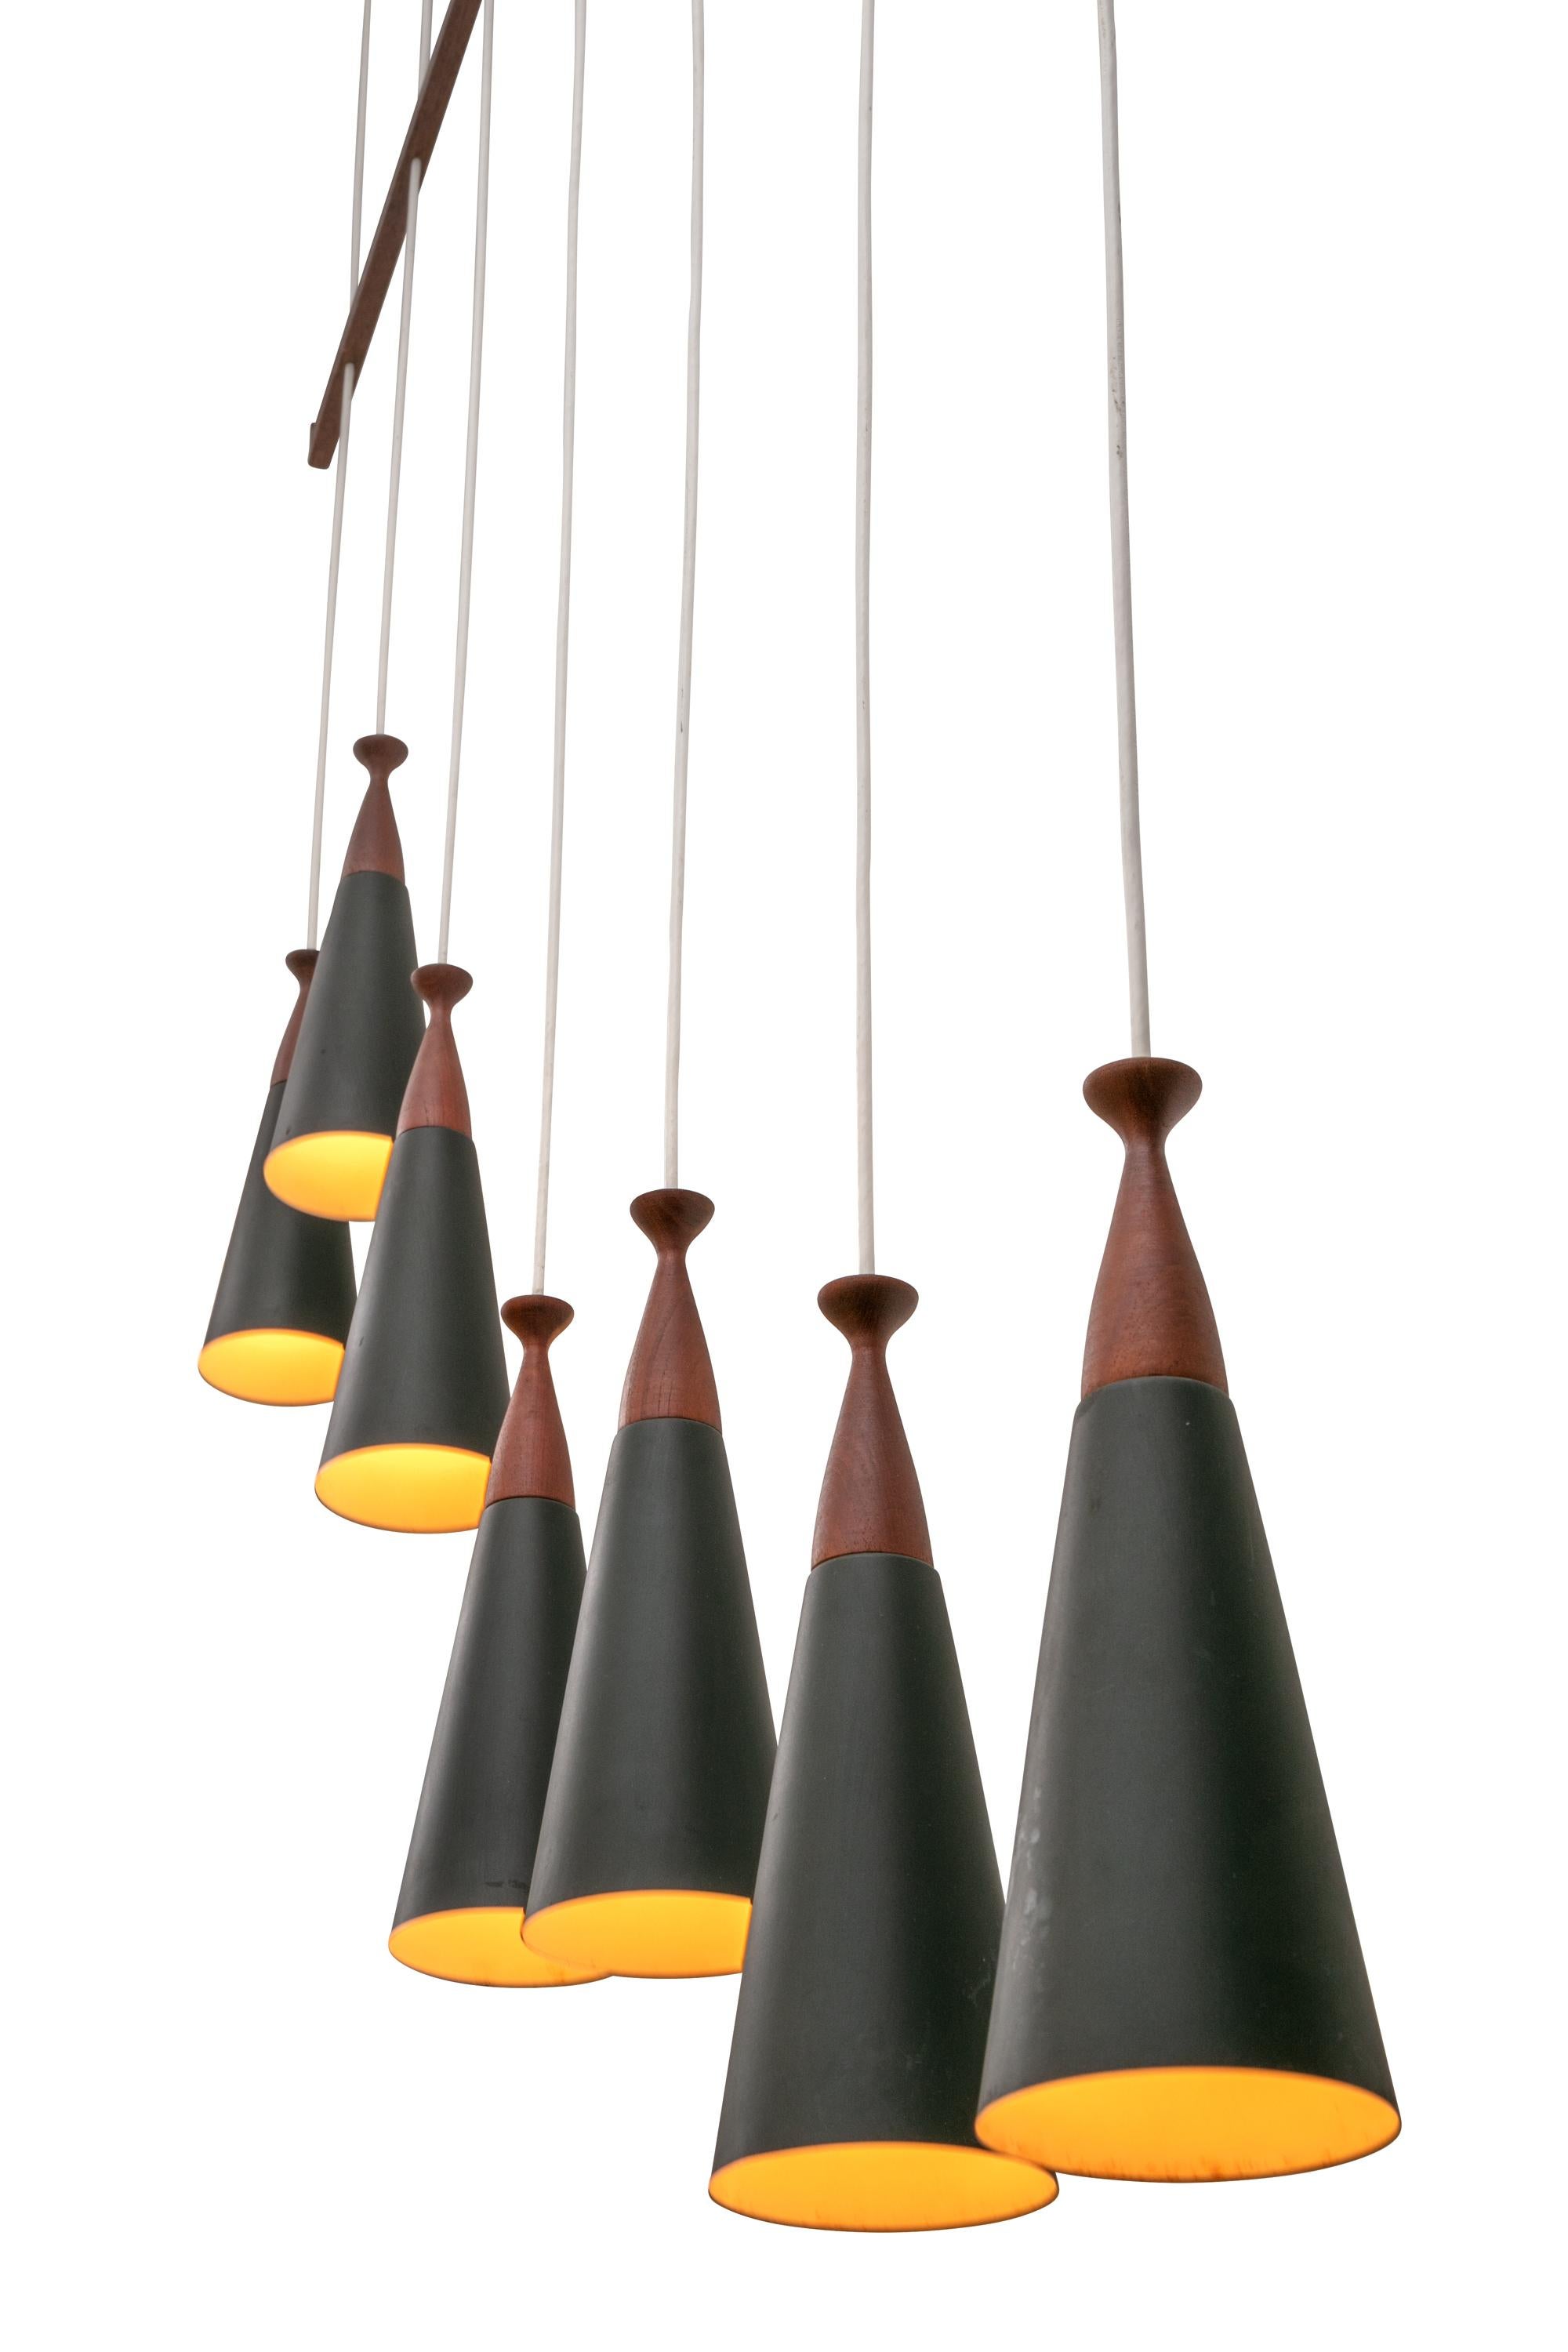 Impressive in it's scale and teak elements. The individual pendants could be adjusted in height if desired.